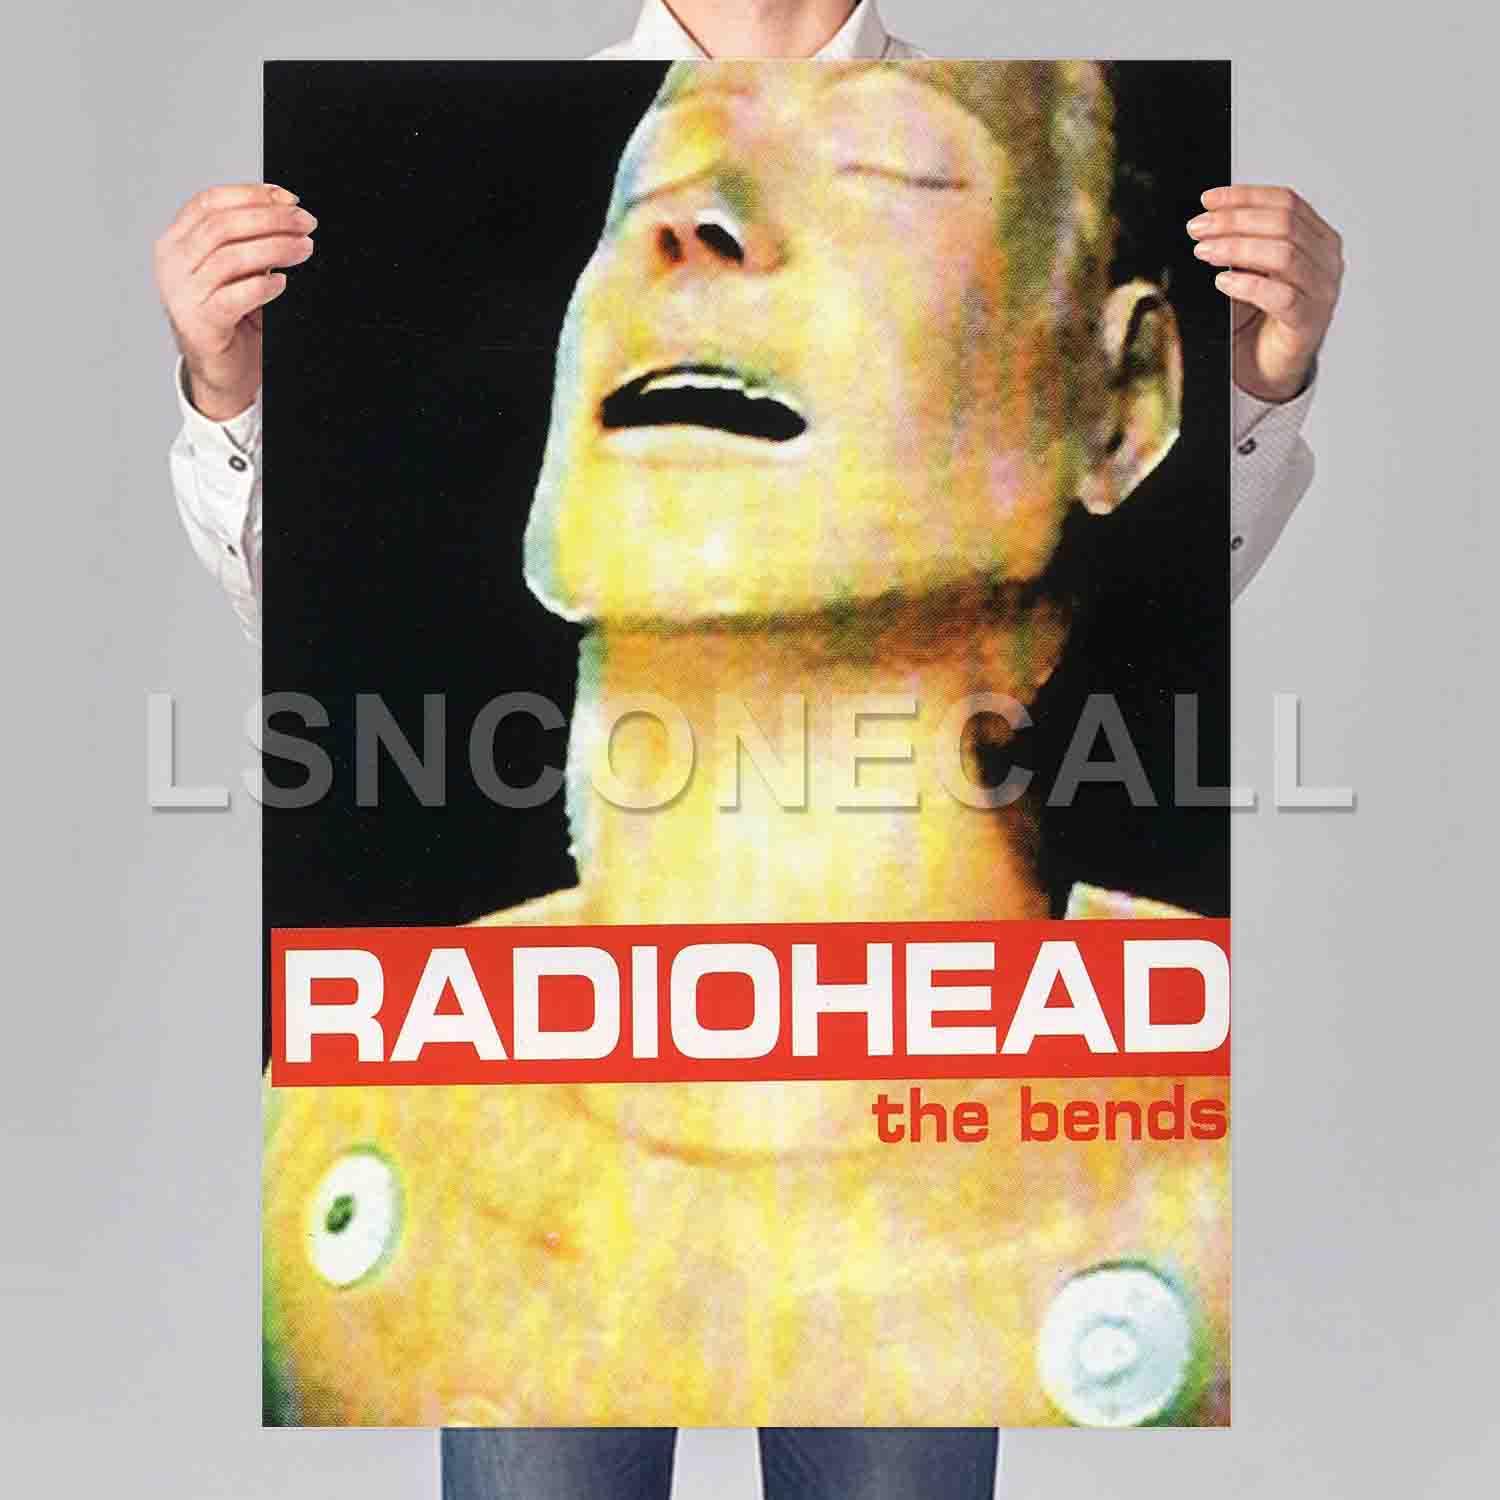 Radiohead The Bends Poster Print Art Wall Decor Lsnconecall Lsnconecall